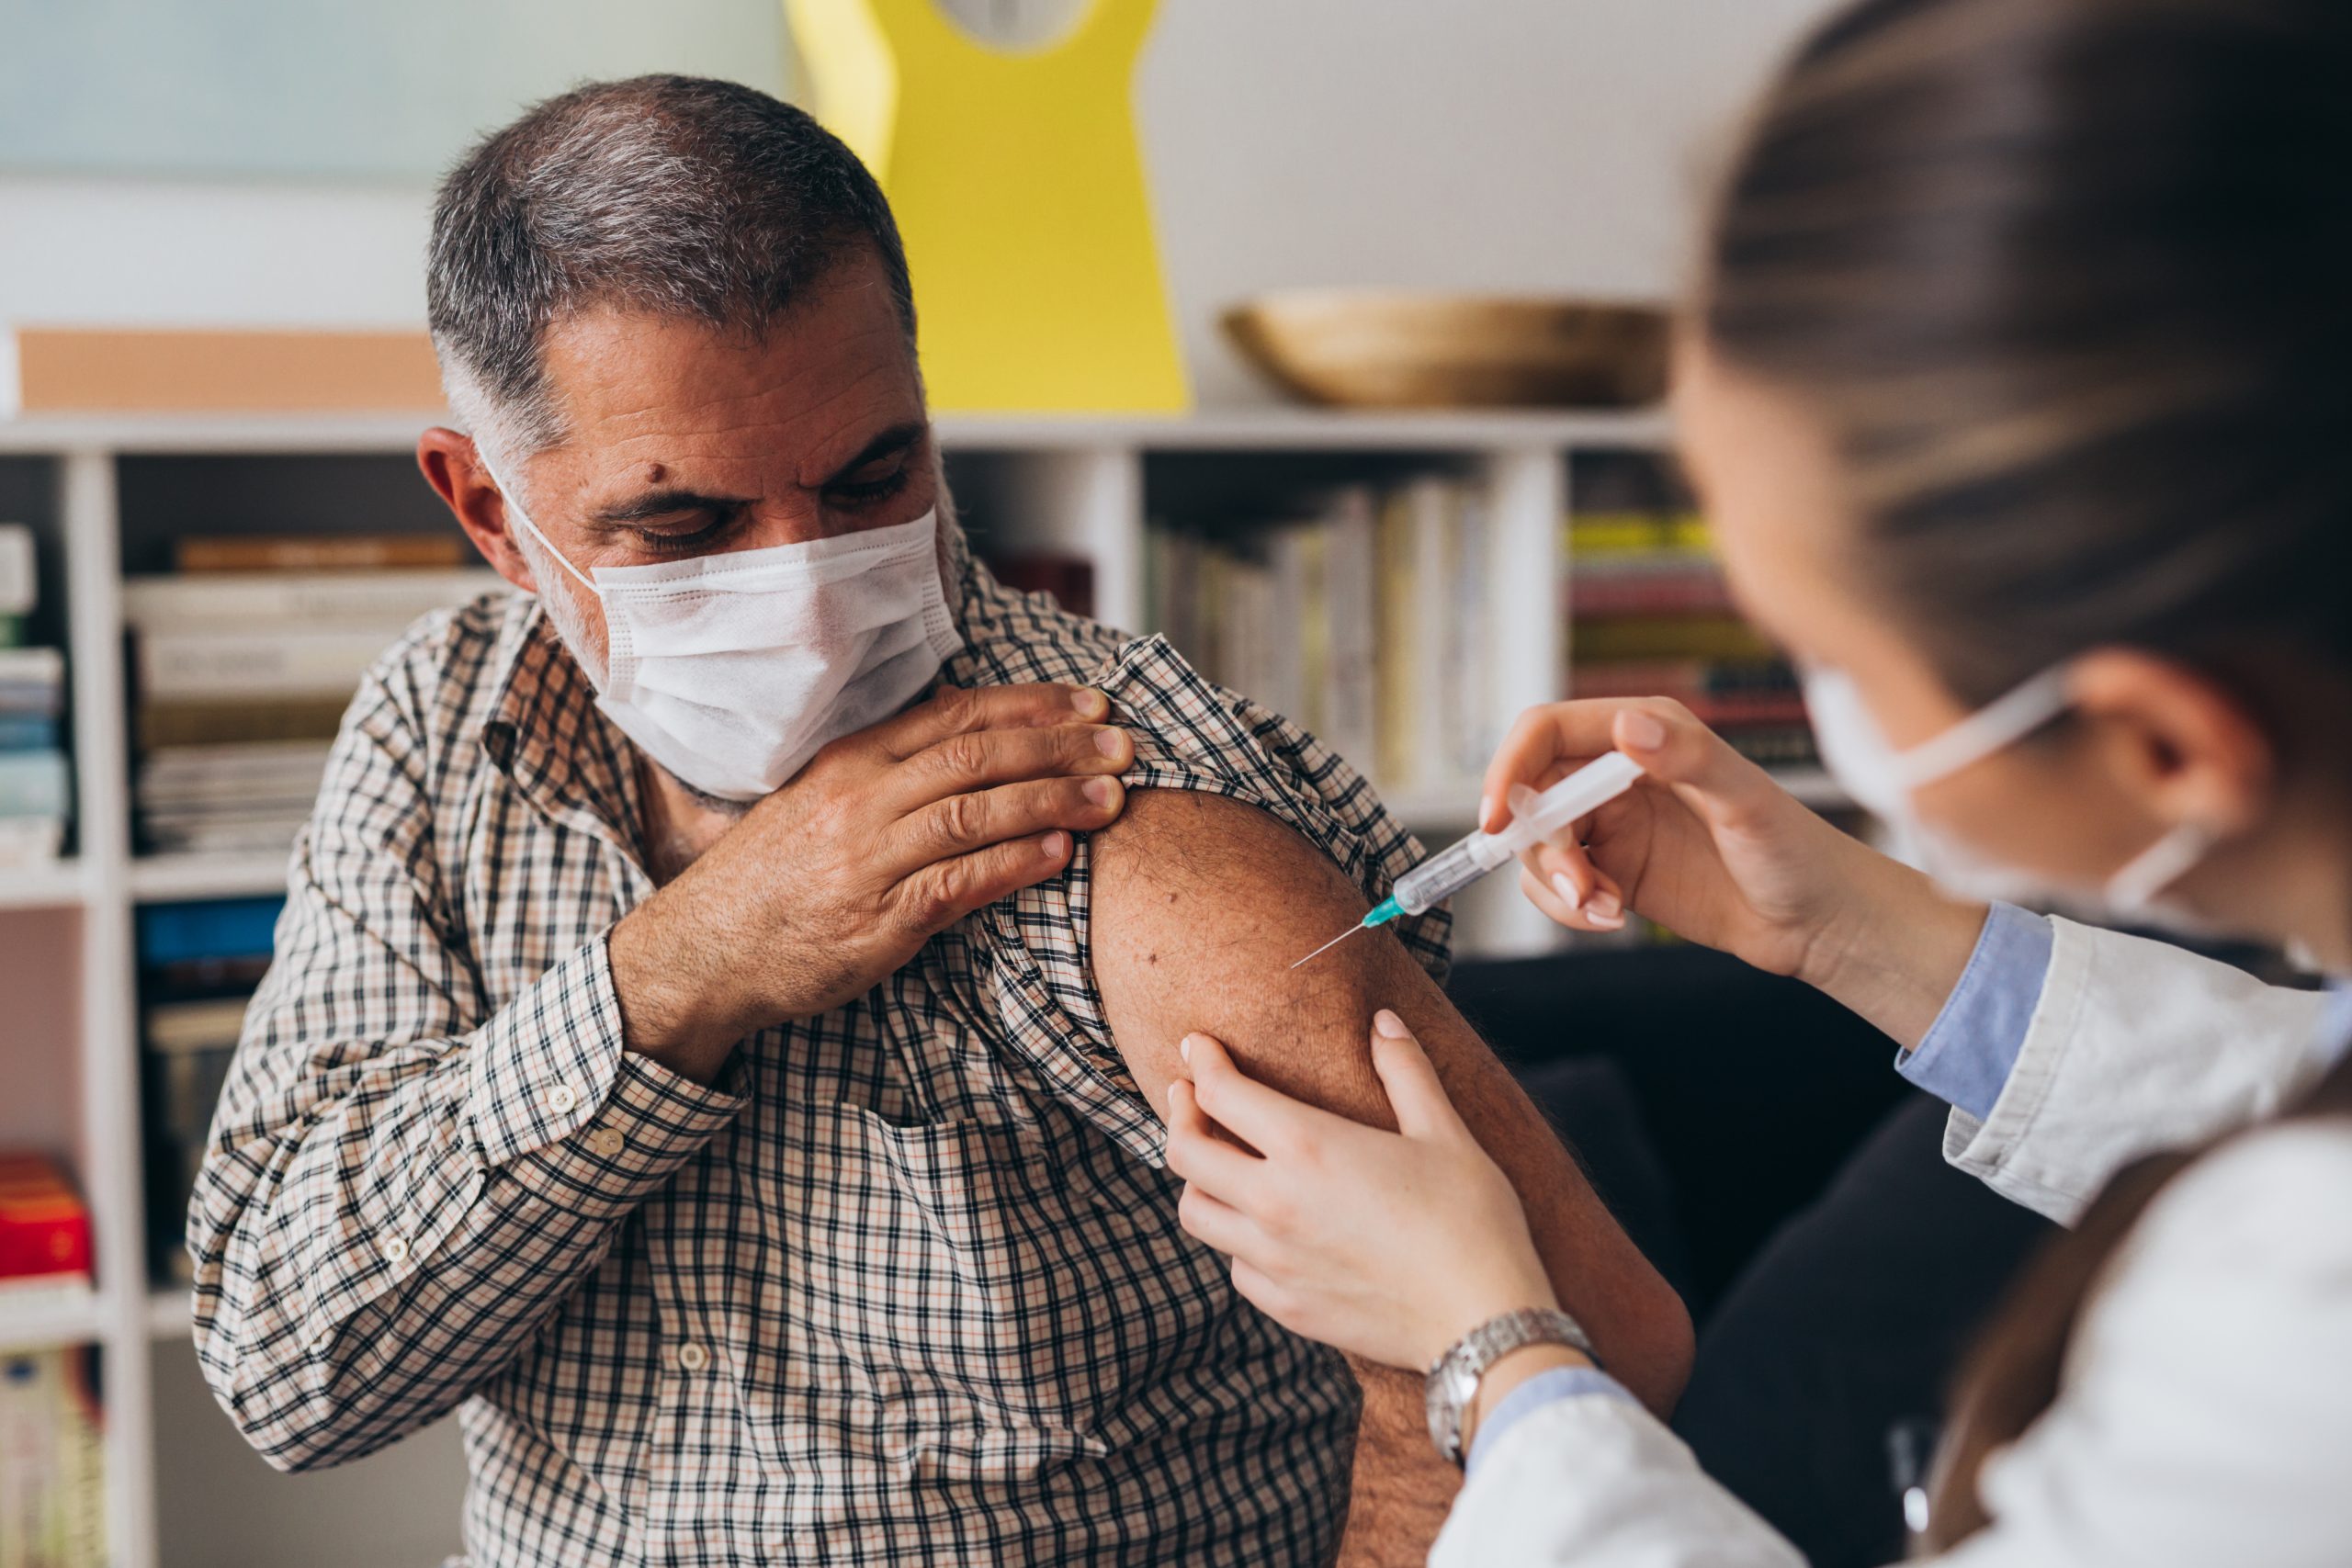 Man being vaccinated at work - workplace vaccination clinic